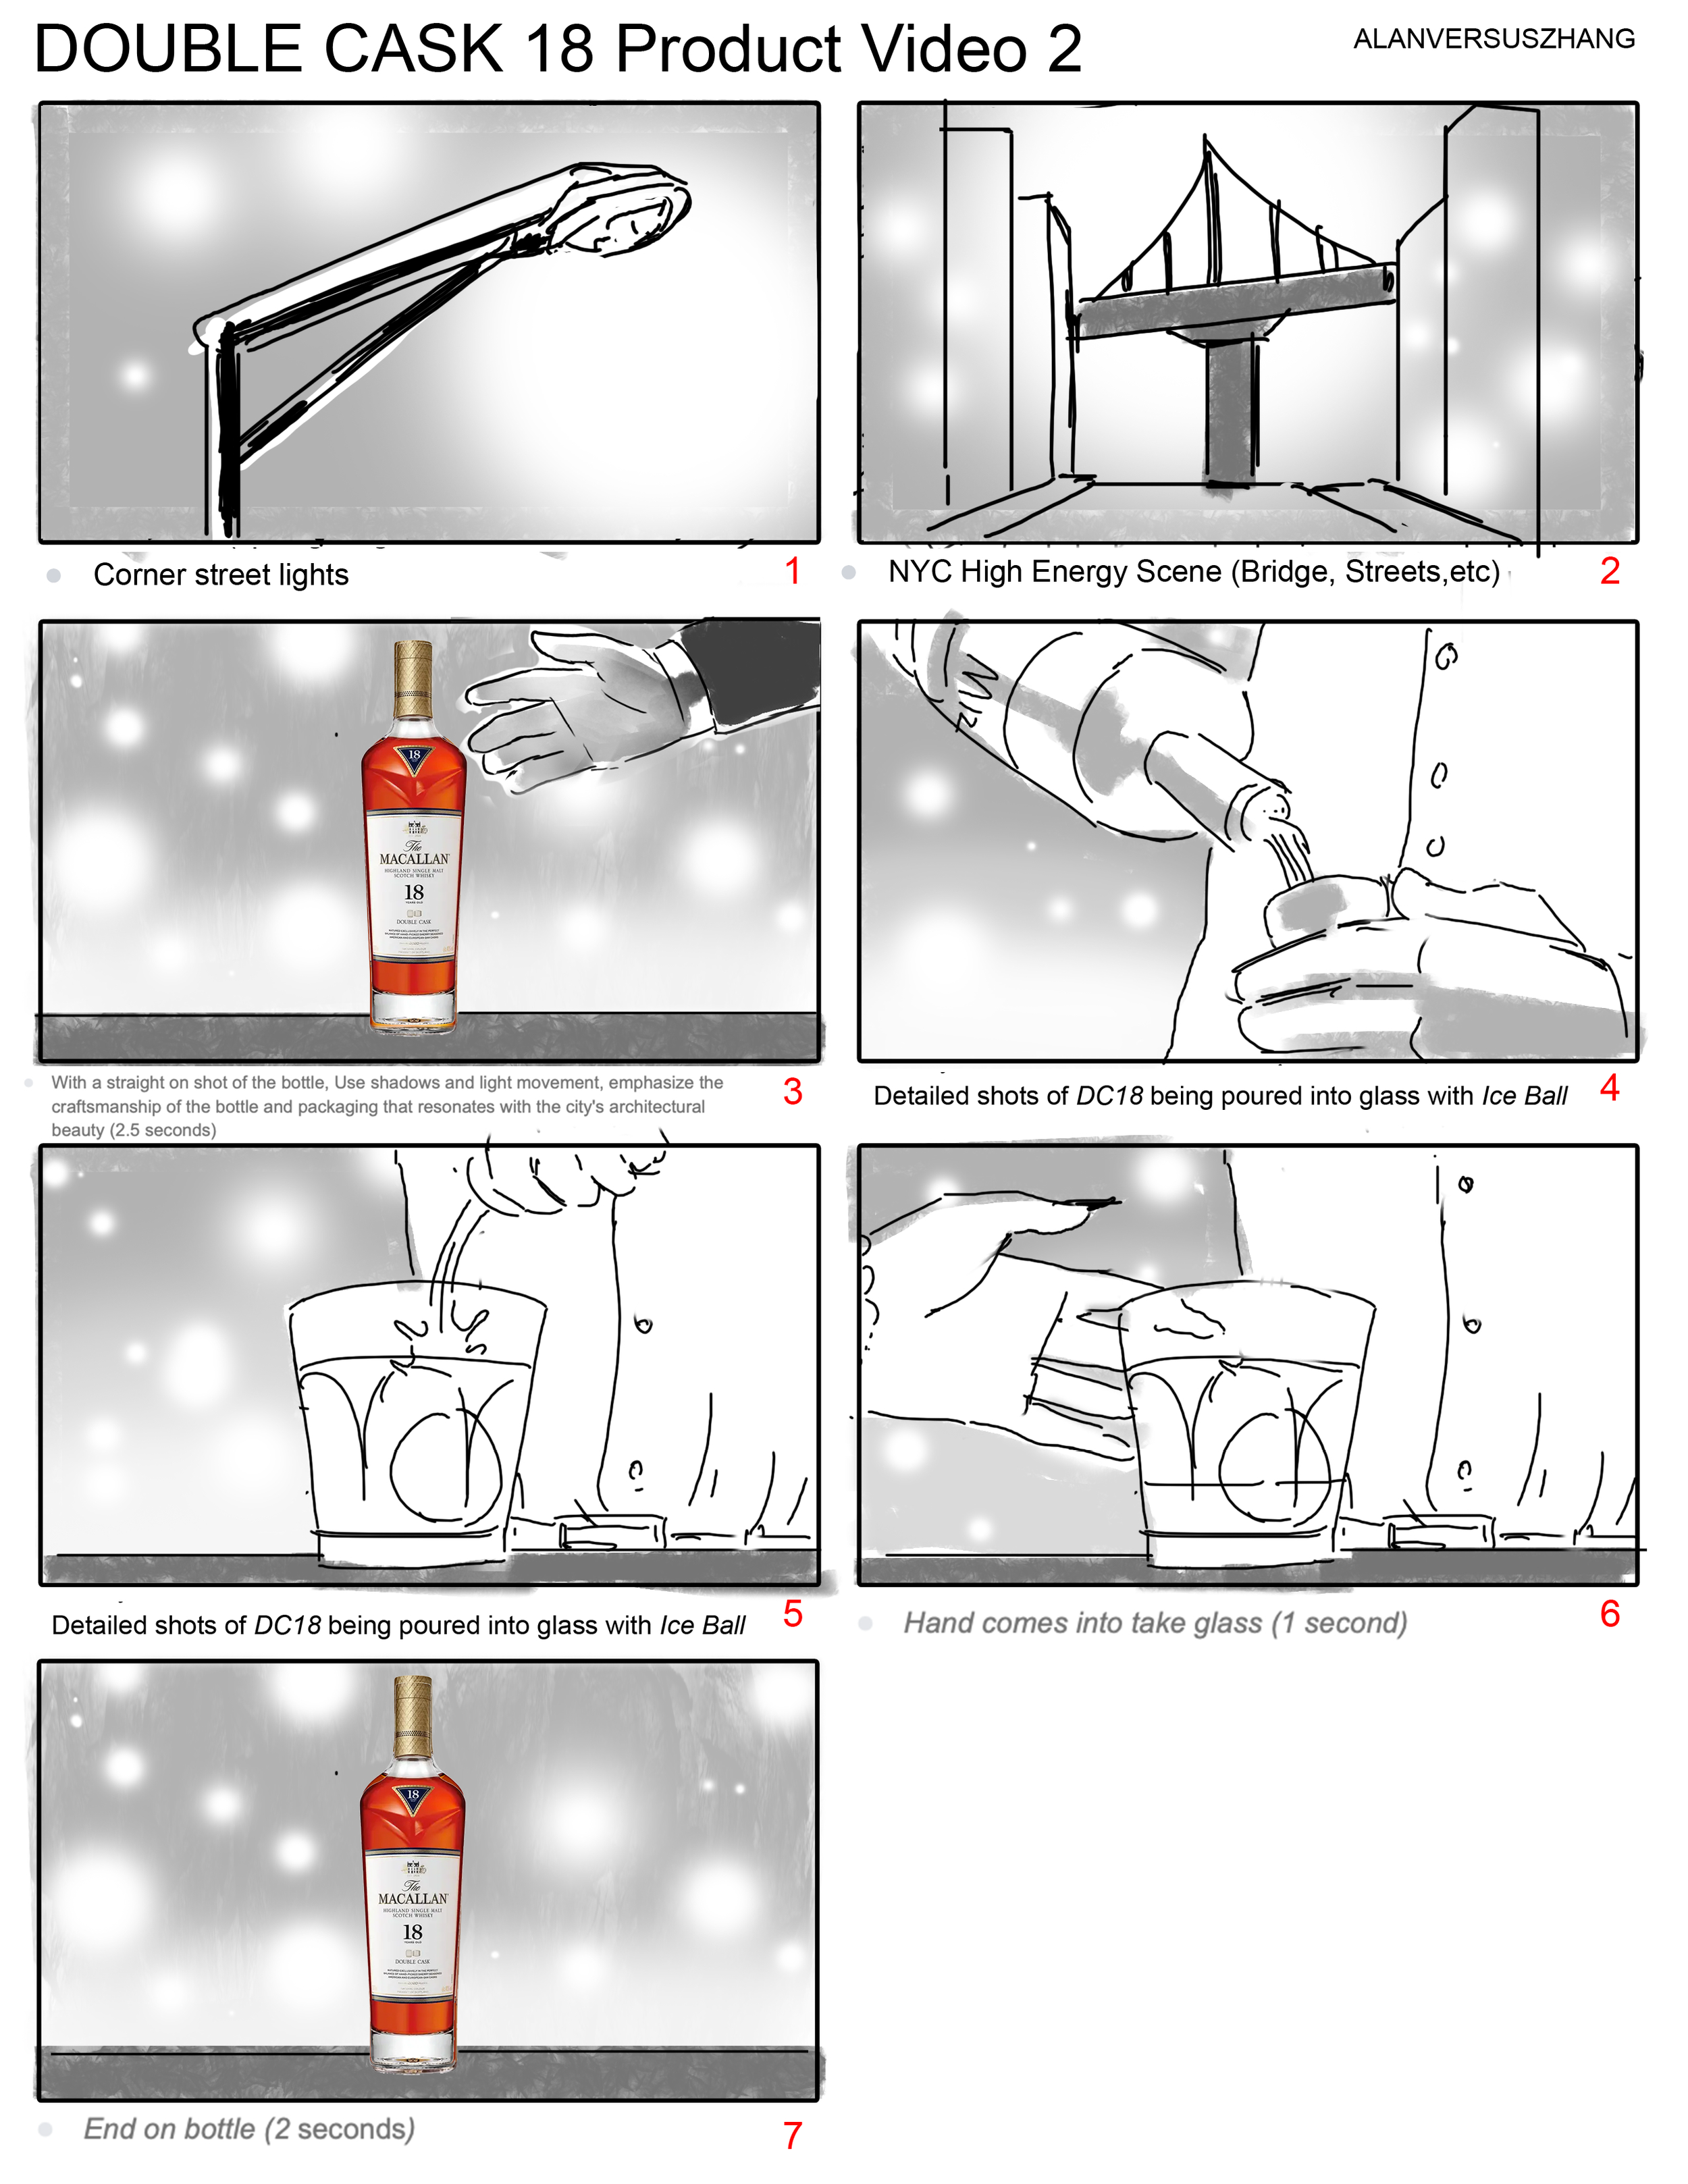 11.10.23_Macallan_Storyboards_Page_10_Image_0001.png